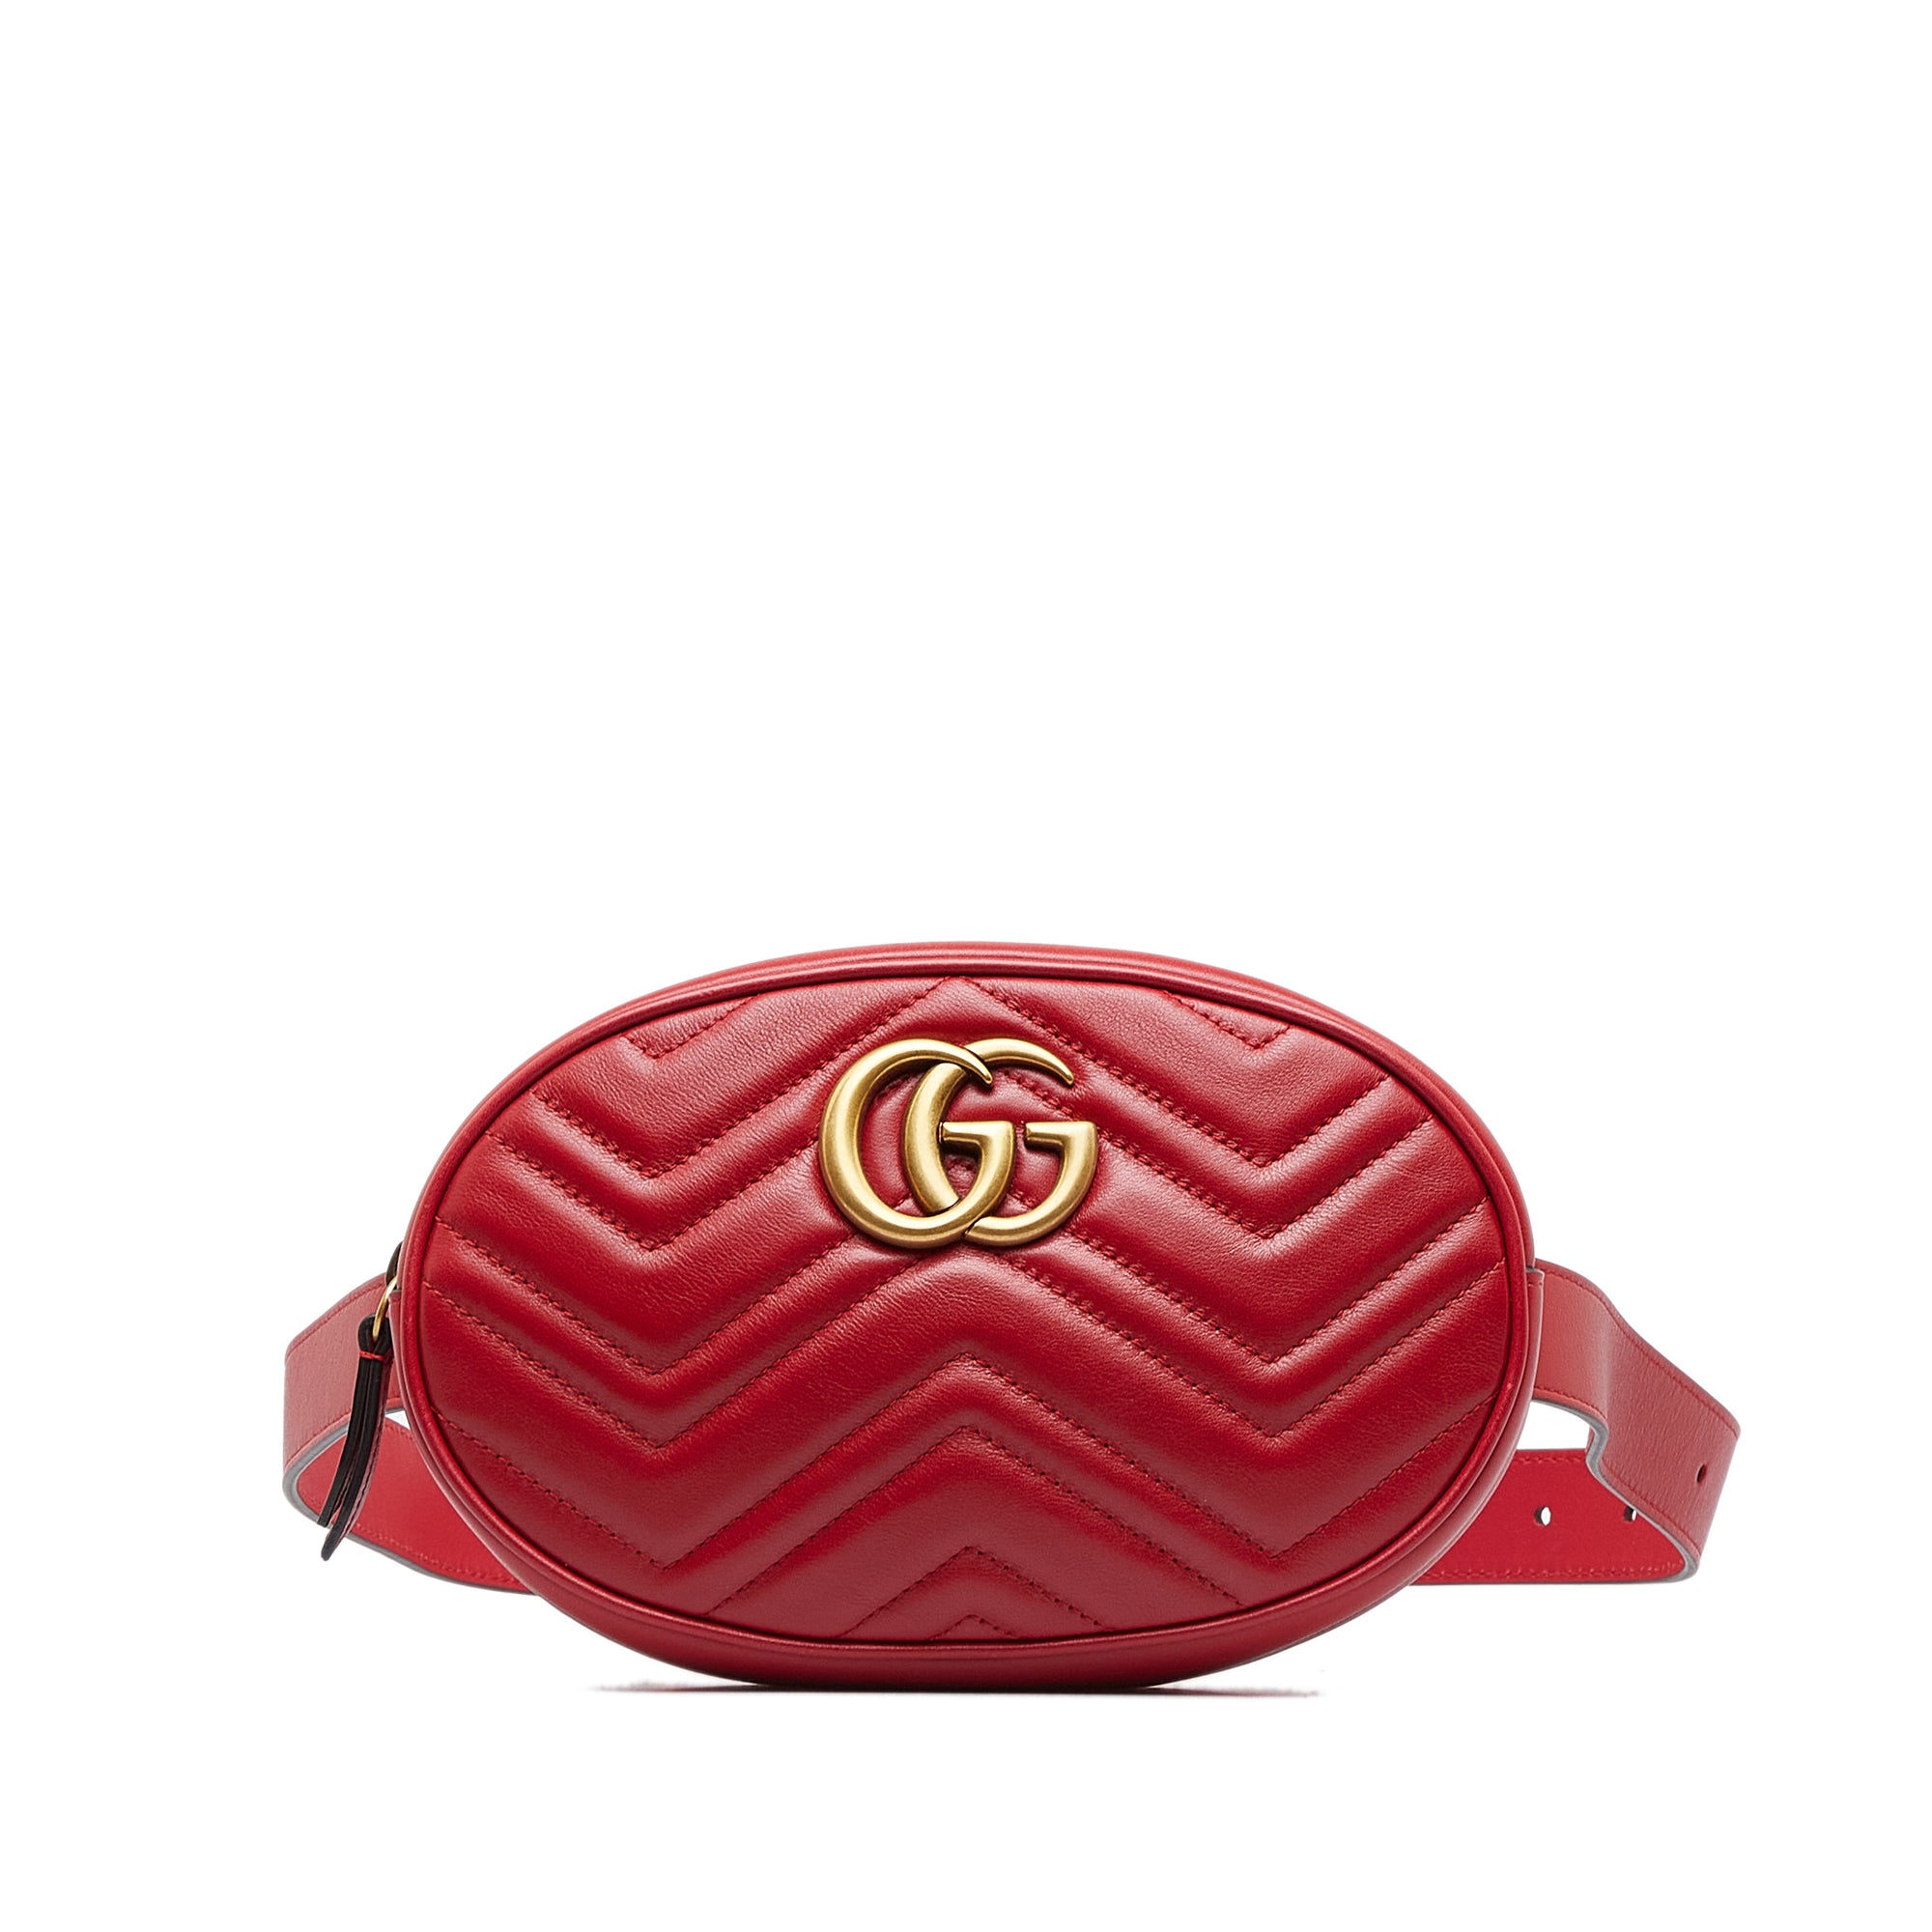 Gucci handbag real vs fake review. How to spot counterfeit Gucci GG Marmont  hand bags and purses 